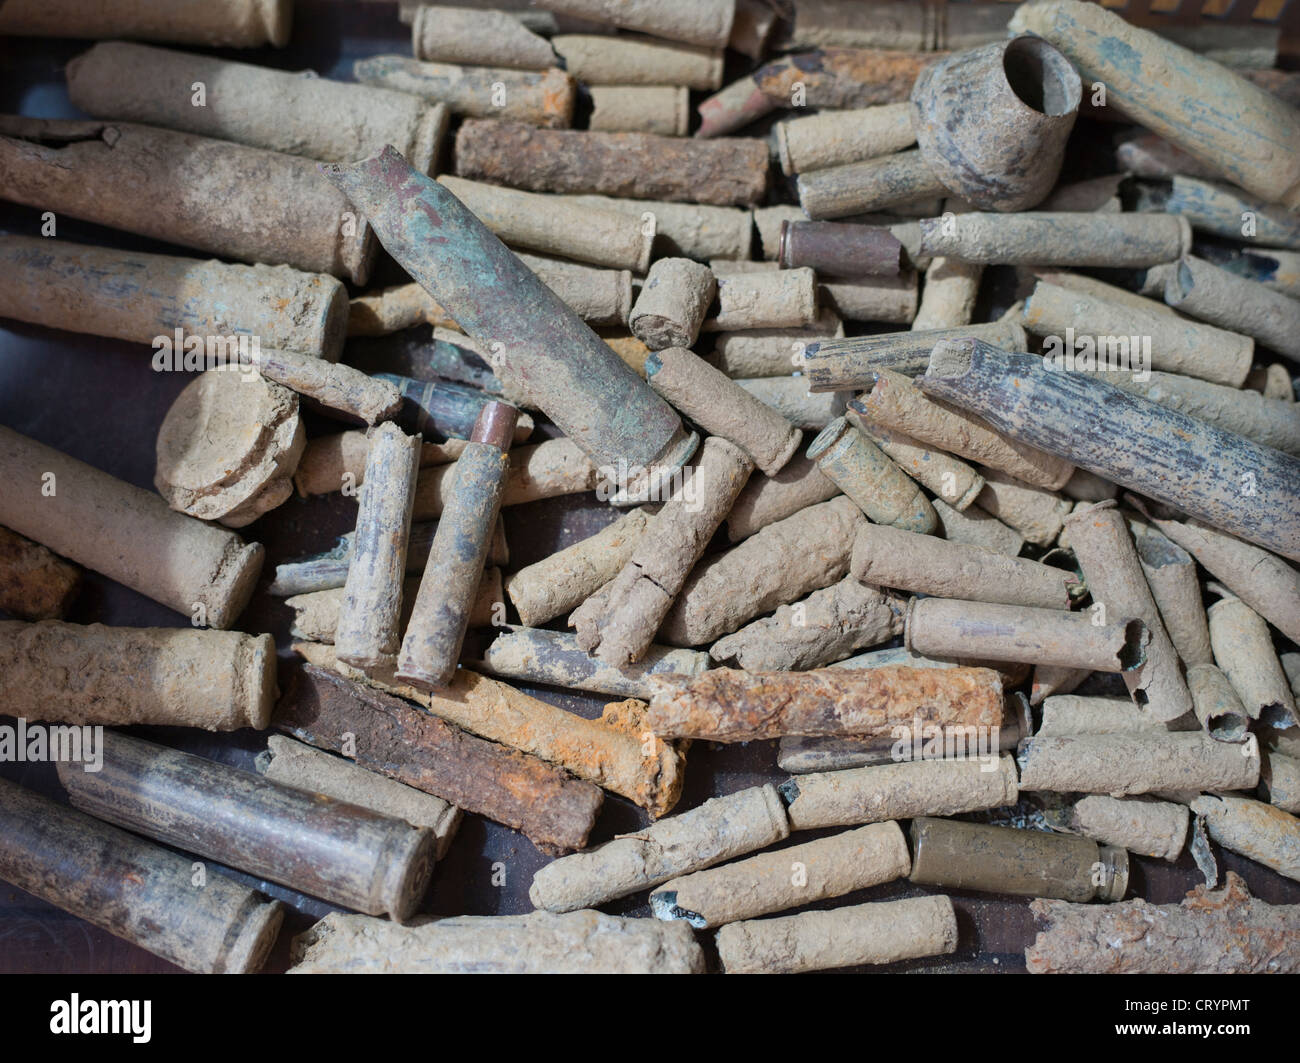 Rusting and corroding bullets from WWII that are found during construction in Okinawa Stock Photo